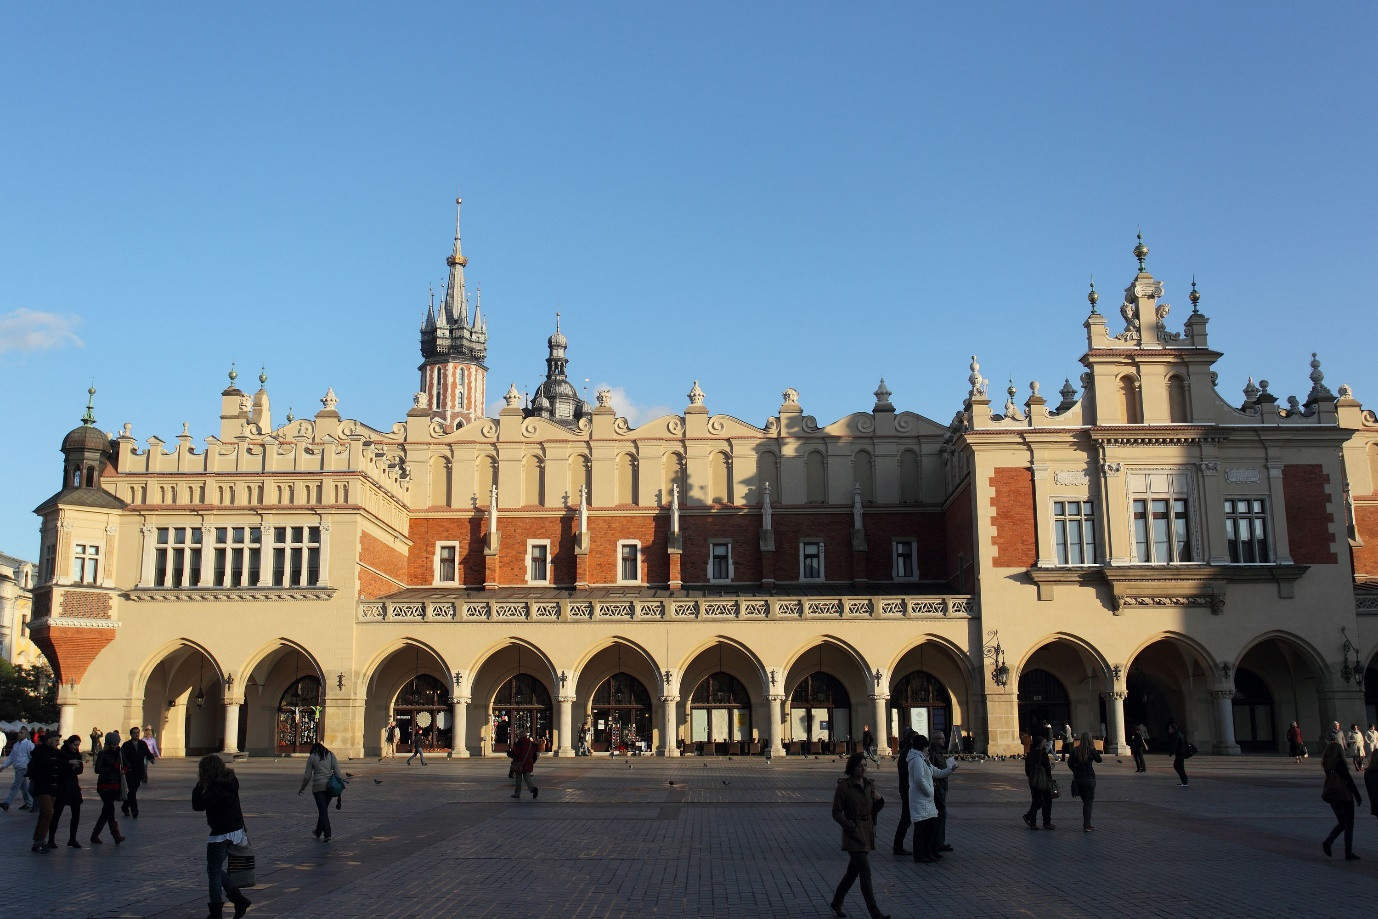 Drapers Hall, the central feature on the main market square in Kraków ©Getty Images